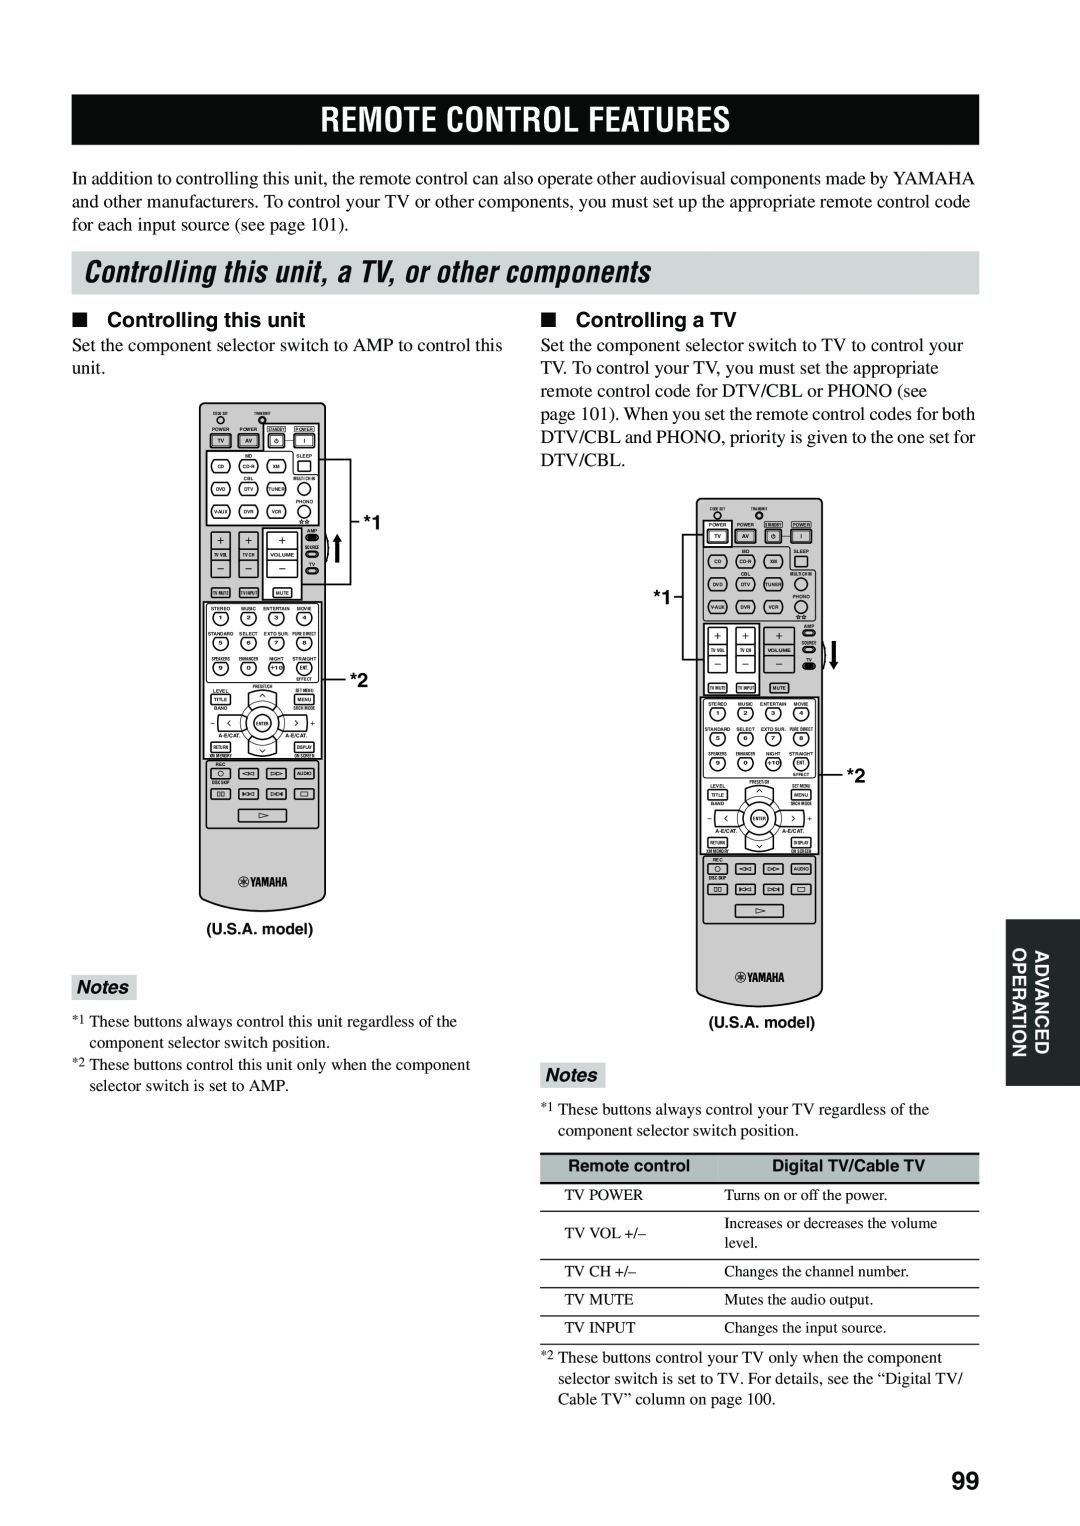 Yamaha HTR-5960 Remote Control Features, Controlling this unit, a TV, or other components, Controlling a TV, Notes 